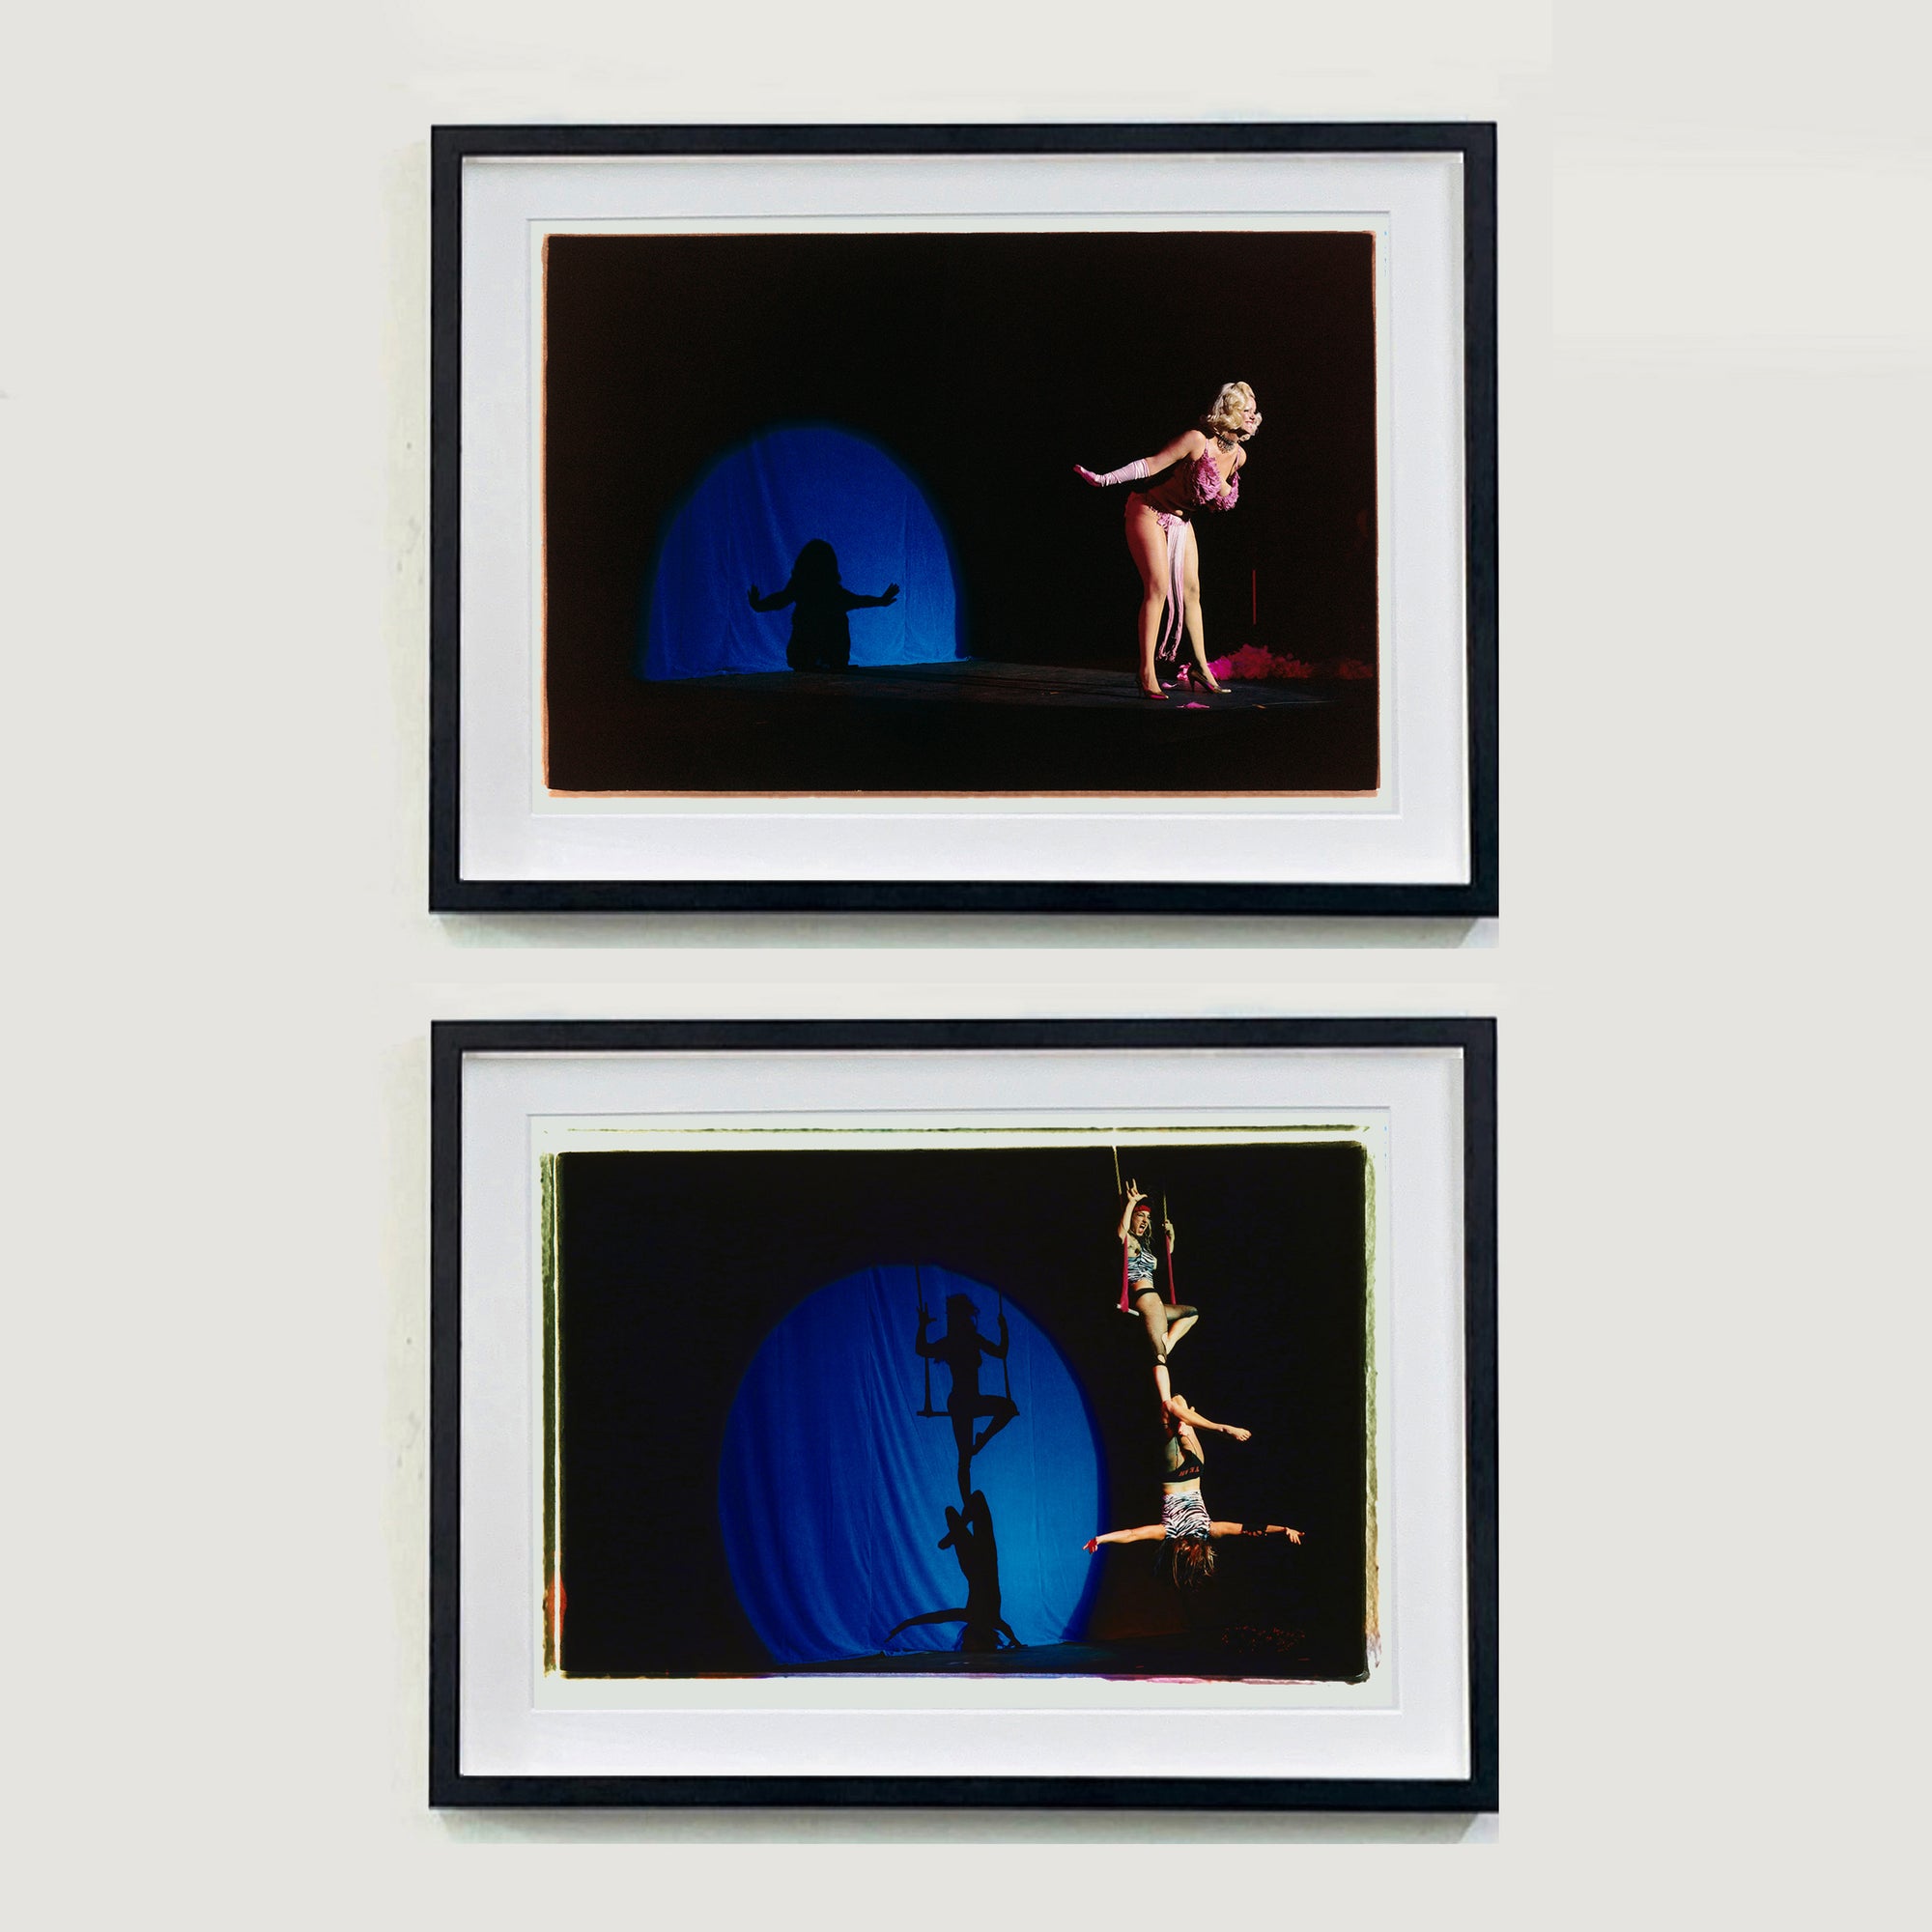 Two photograhs by Richard Heeps. The top photograph depicts a Burlesque dancer with a pink fluffy bikini who bows on a black stage, in the background is a blue circle containing her silhouette. The bottom photo has a pair of dancers on a trapeze, one is sitting on the swing and the other dangling below. The stage is dark and there is a blue circle behind them with their silhouettes in.